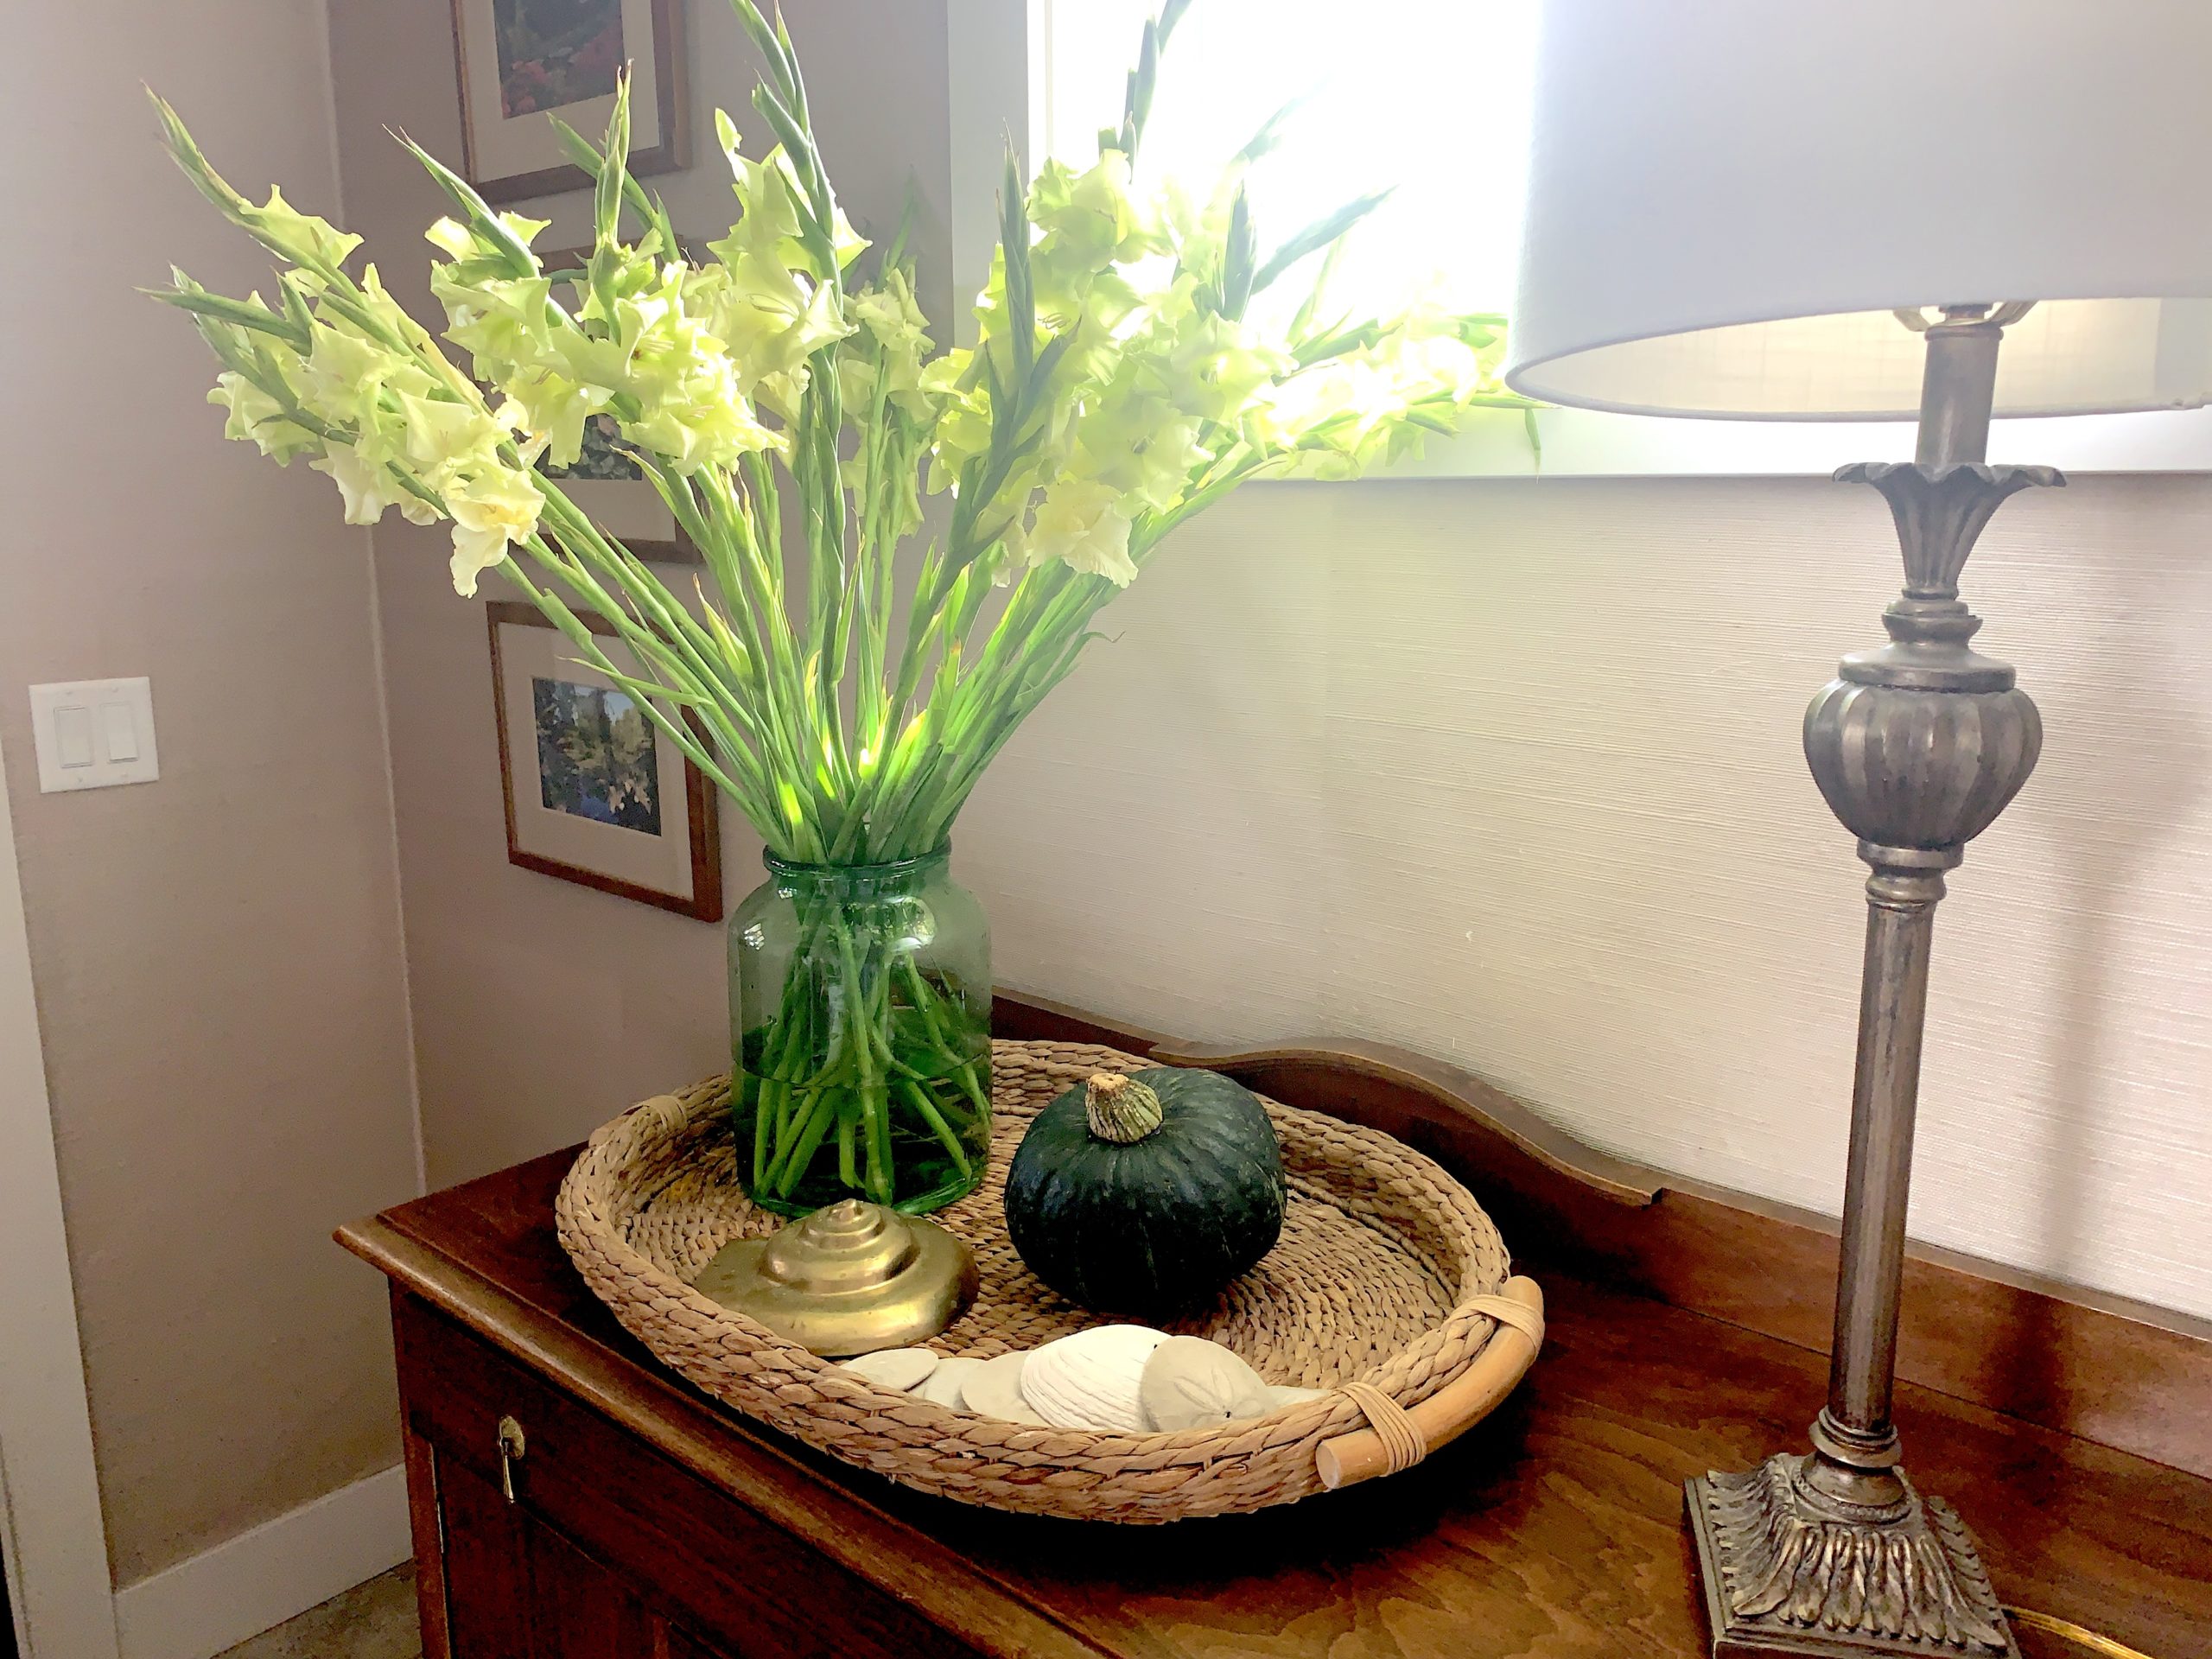 12 Simple Ideas for Beautiful Flowers in the Home